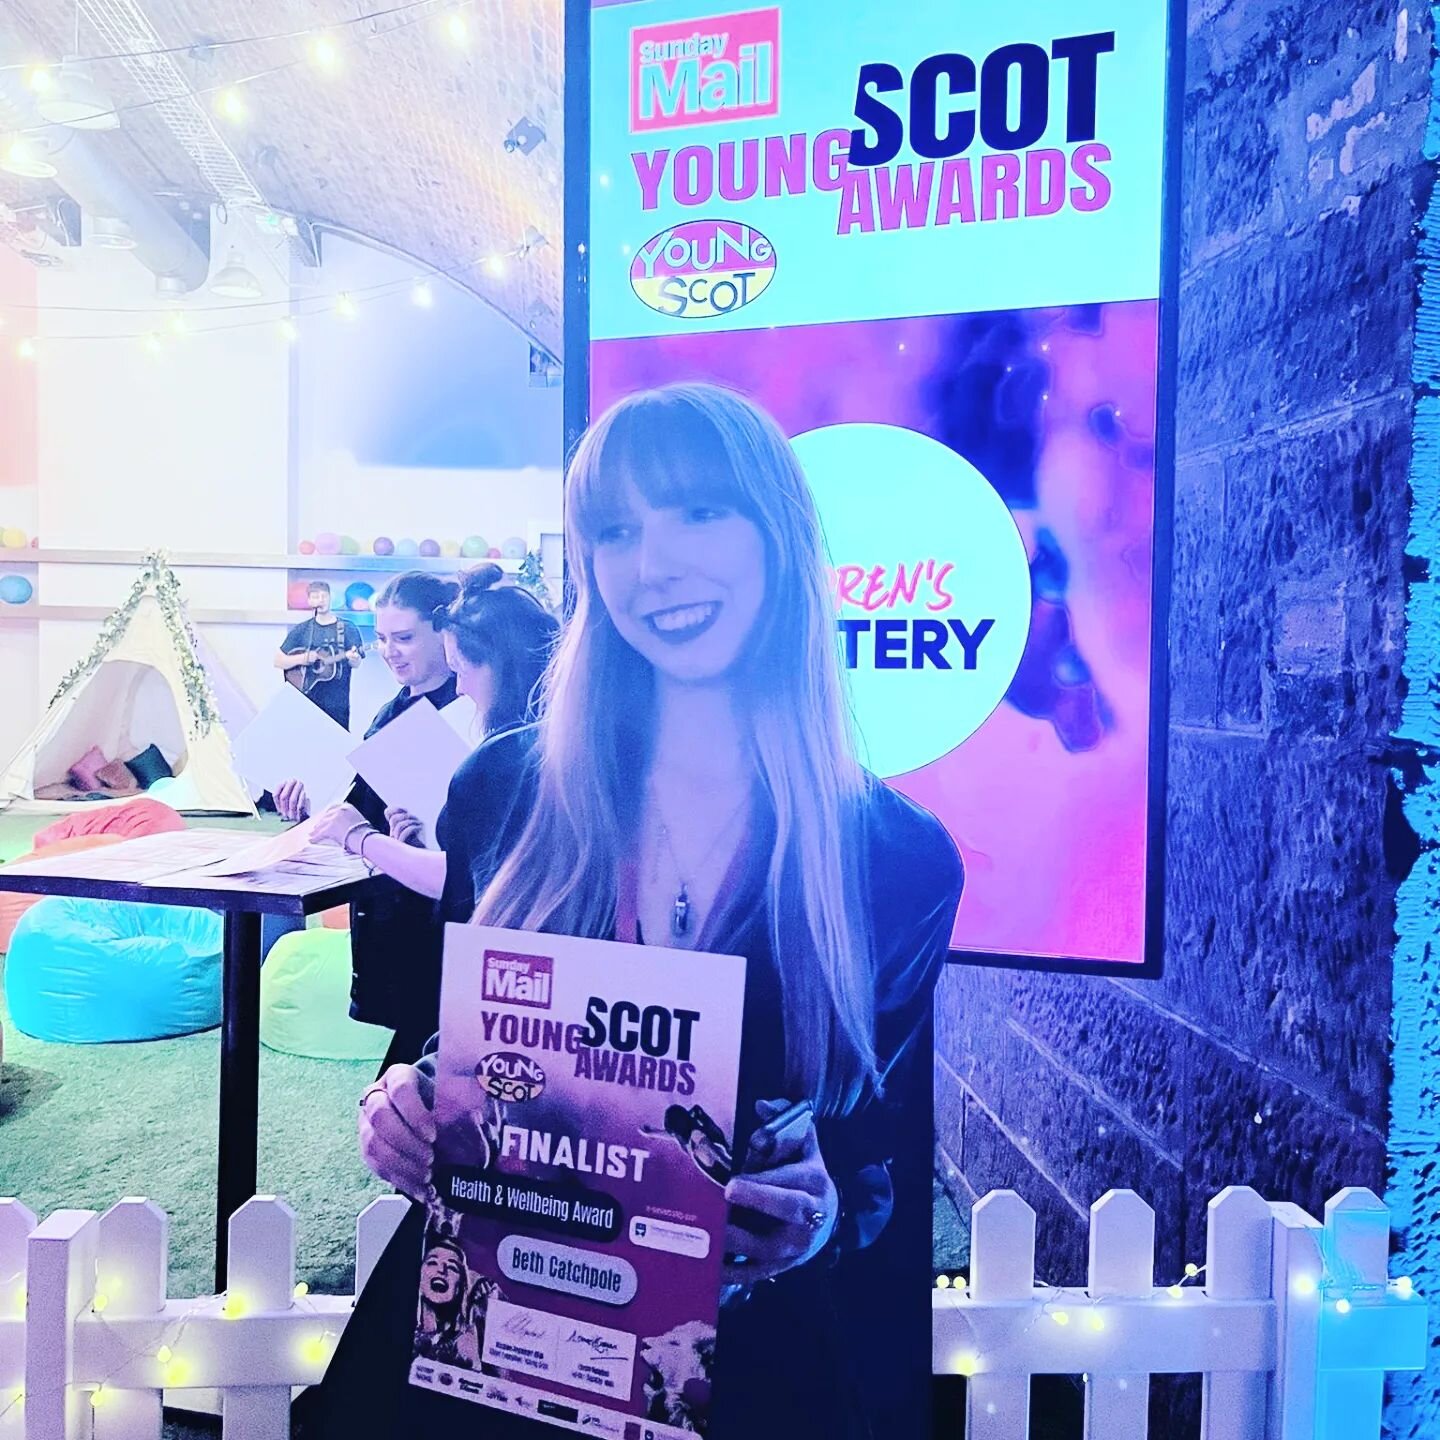 🔙 Our Listening Peers Mentor Beth was a finalist at the Sunday Mail @youngscot Awards last month 🙌

Read about Beth's inspirational story and why she was shortlisted via the link in our bio ☺️

#ThrowbackThursday #YSAwards #YSAwards2023 #NewArticle